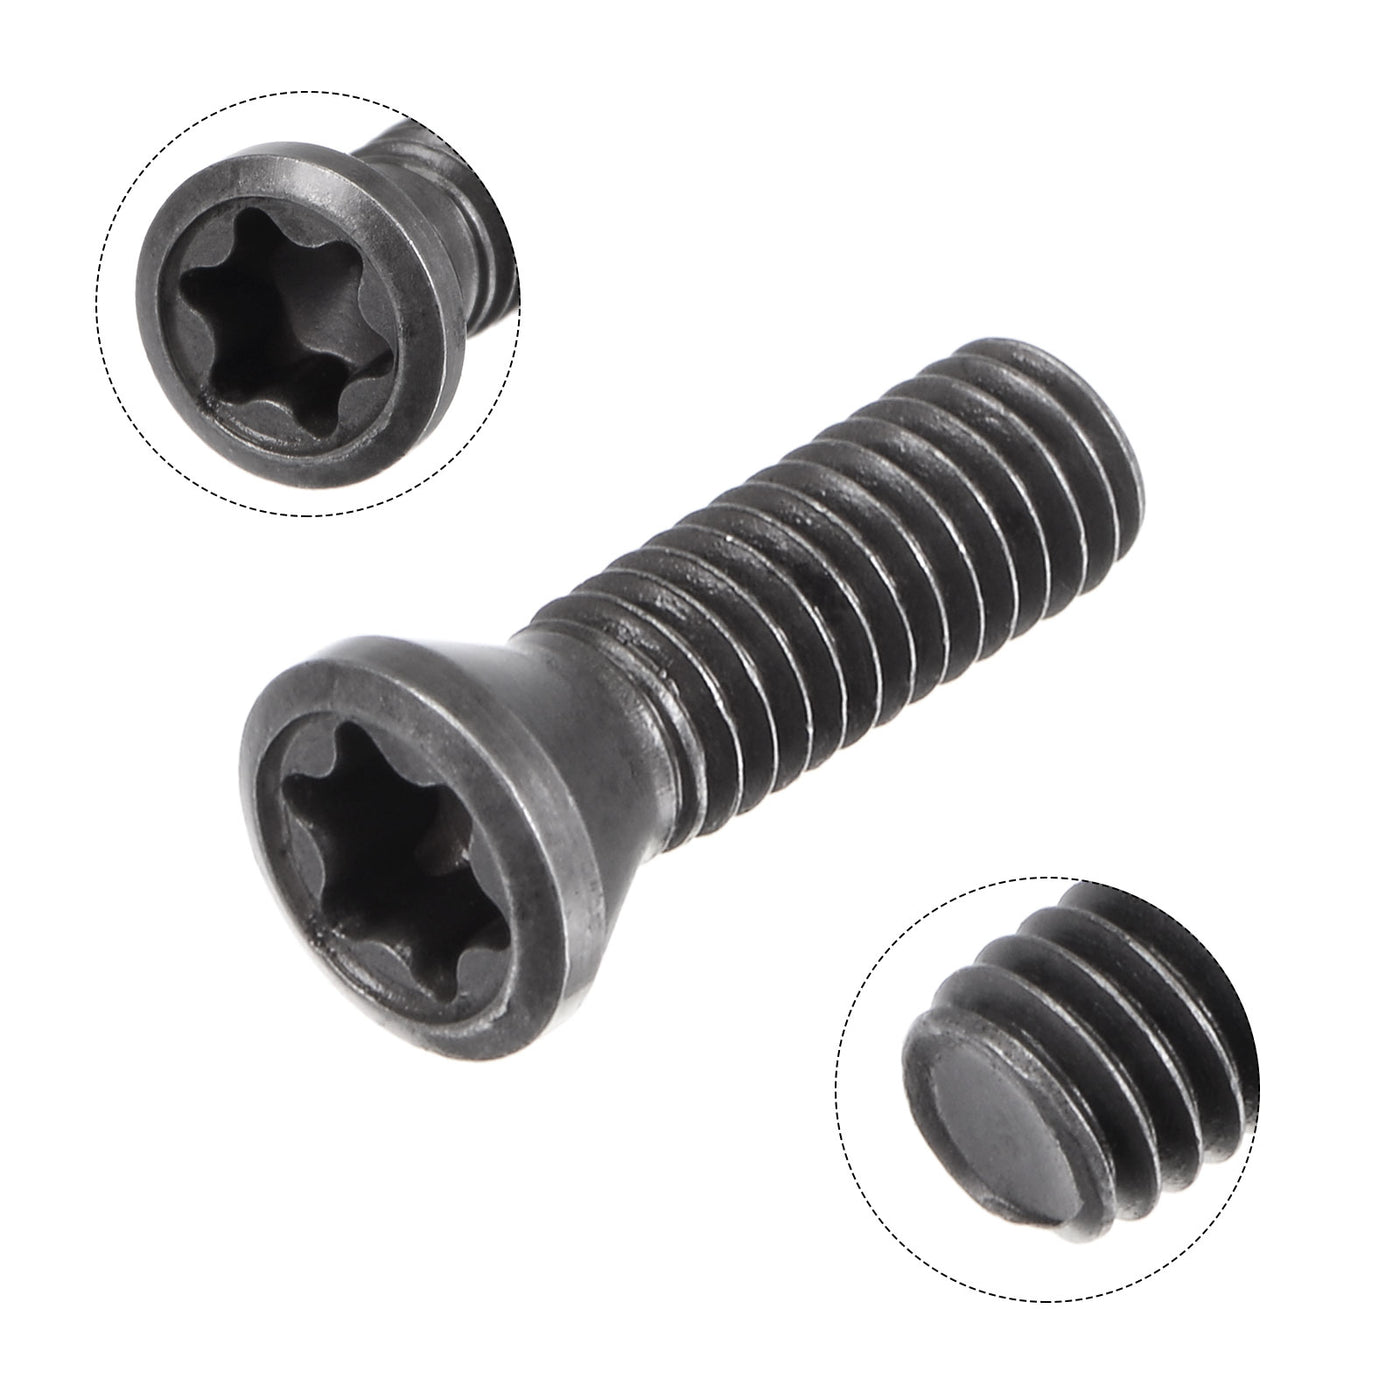 Uxcell Uxcell M3.5x12-D5.3 Torx Set Screws for CNC Lathe Turning Tool Holder, 5Pcs